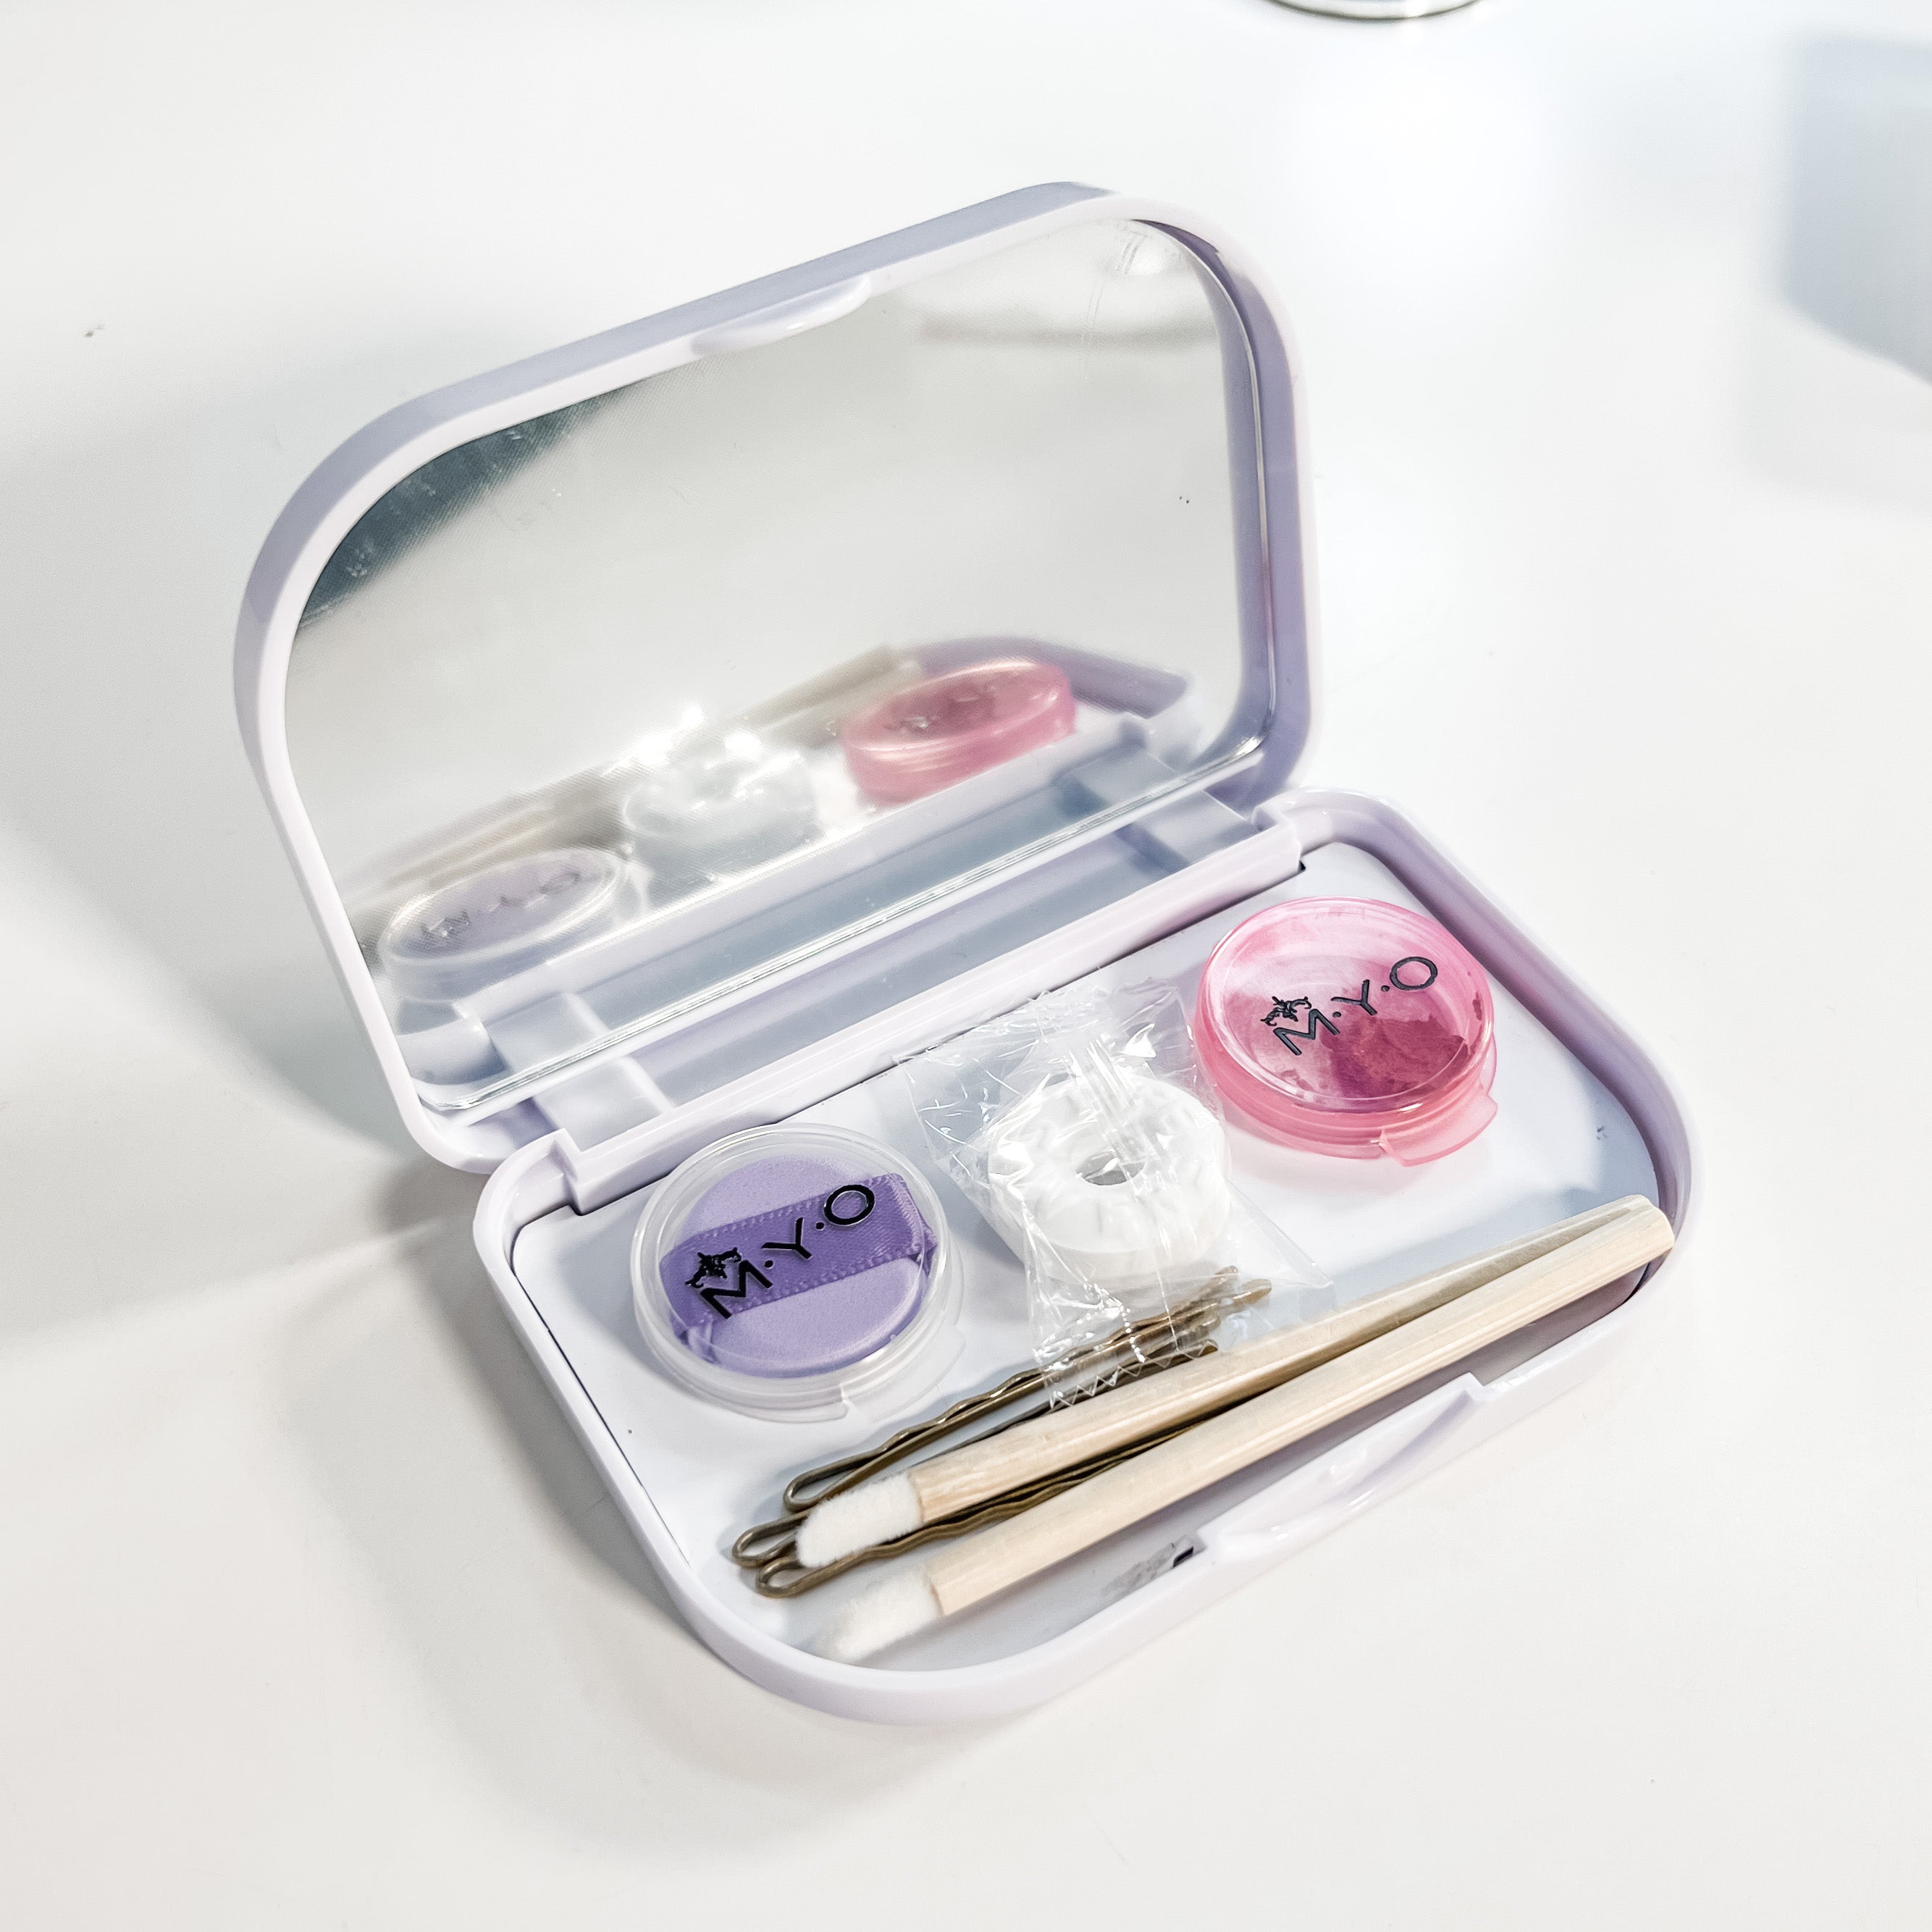 Bridal / Client Touch Up Kit (Set of 10)